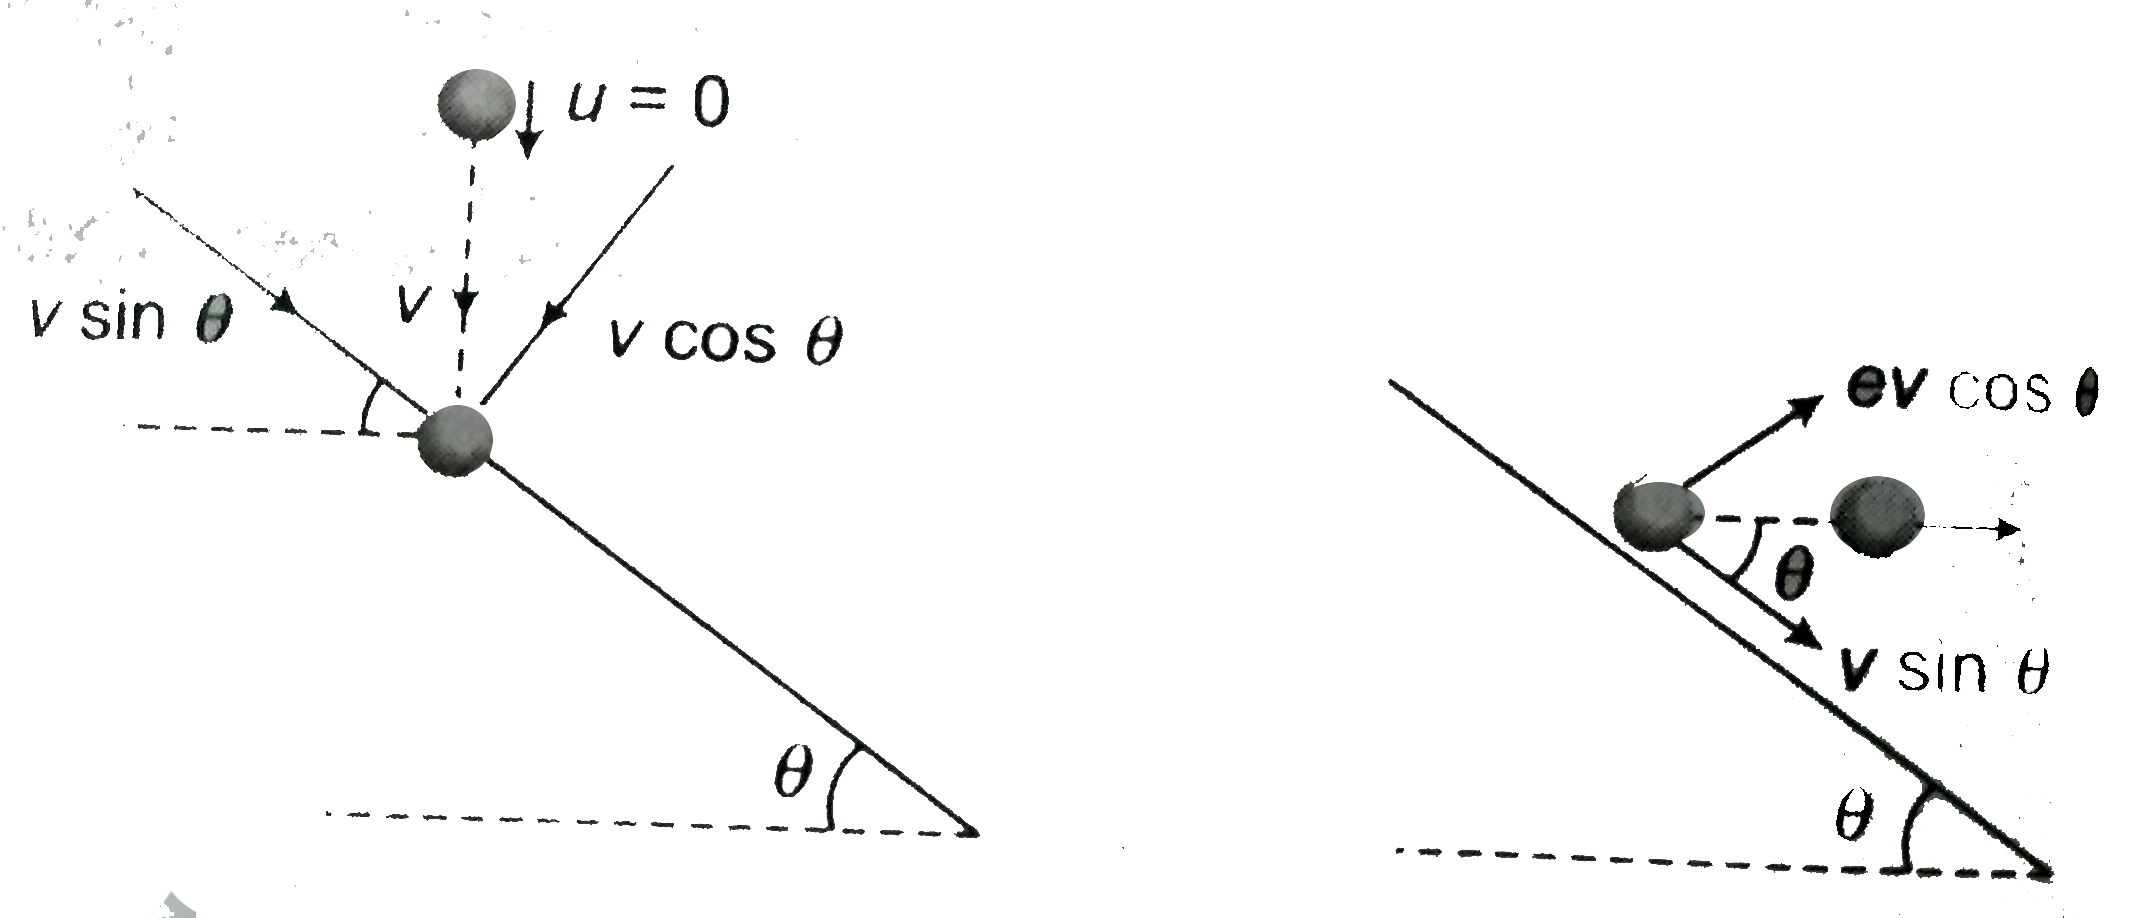 A ball after falling a distance collides an inclined plane of inclination theta. If after the collision , the ball moves horizontally , find the coefficient of restitution.